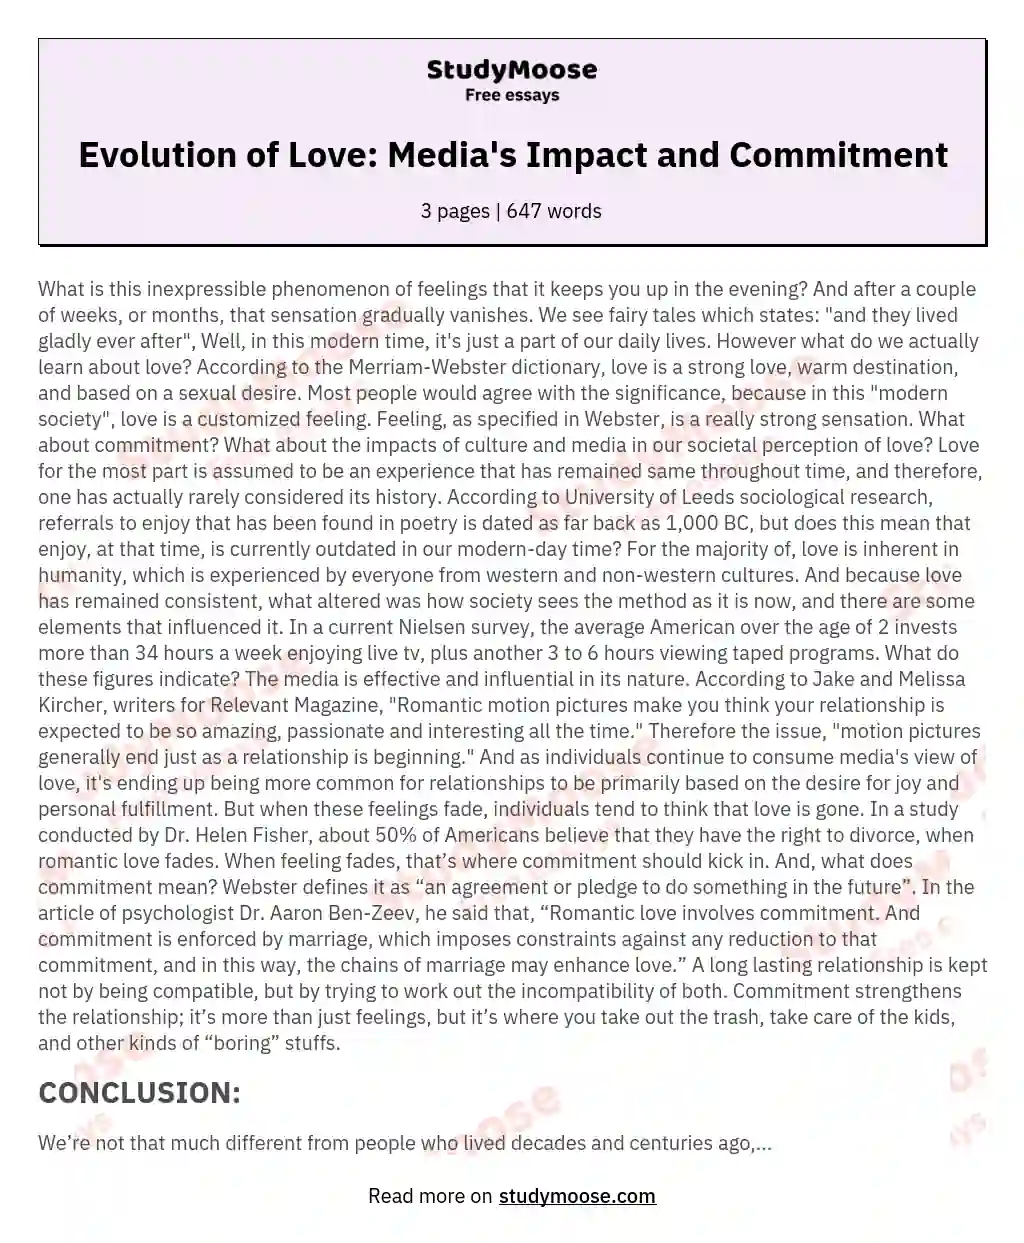 Evolution of Love: Media's Impact and Commitment essay